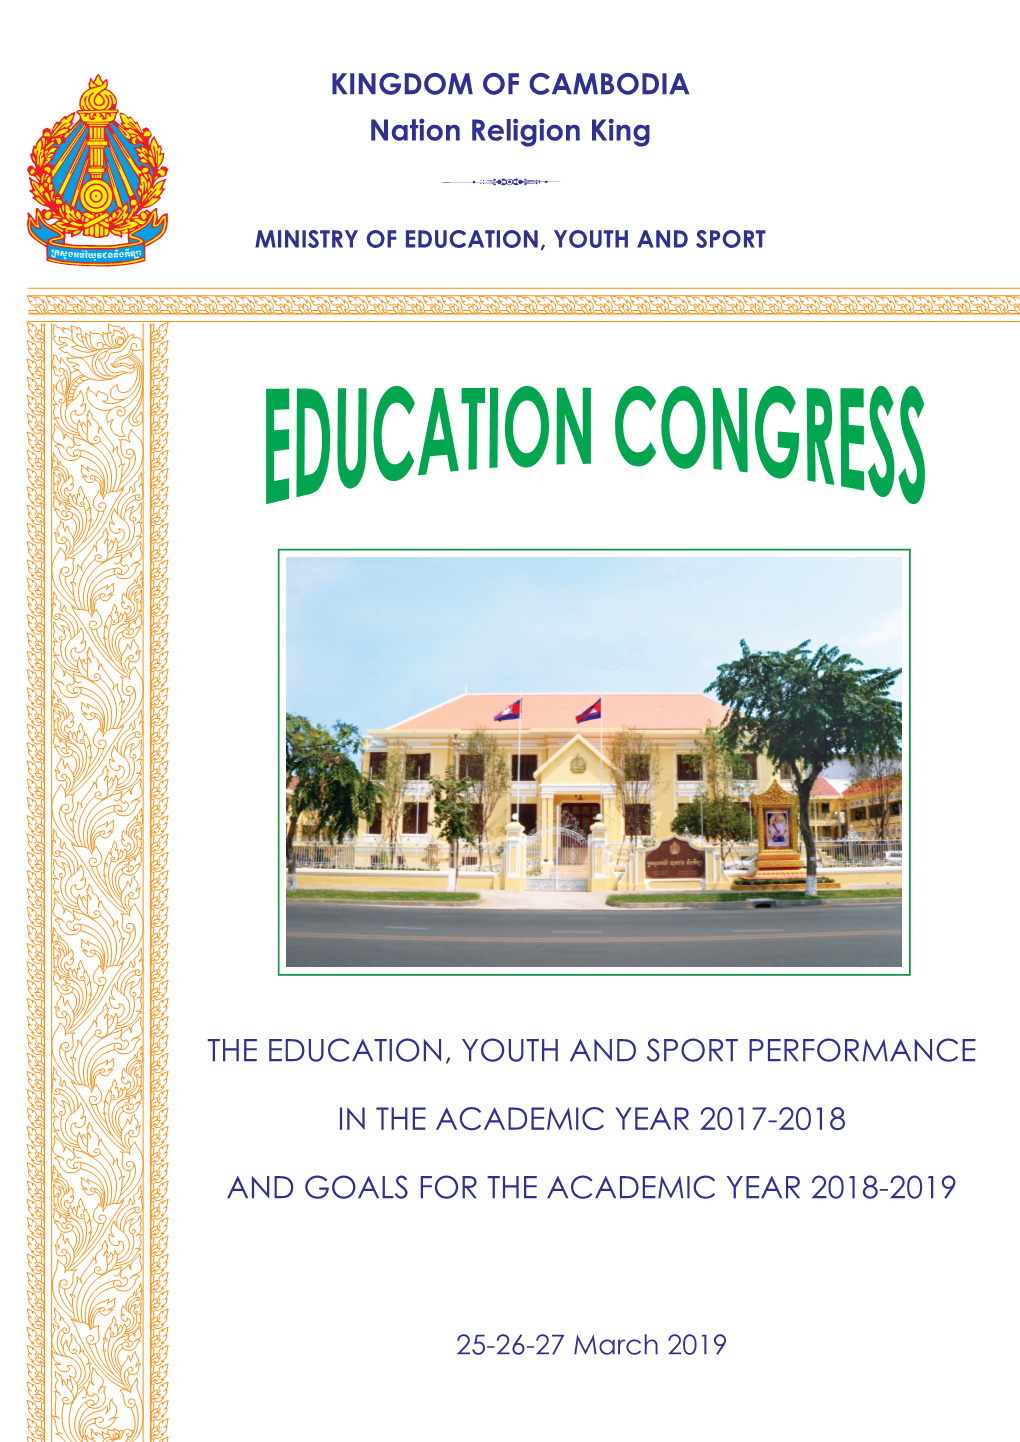 The Education, Youth and Sport Performance in the Academic Year